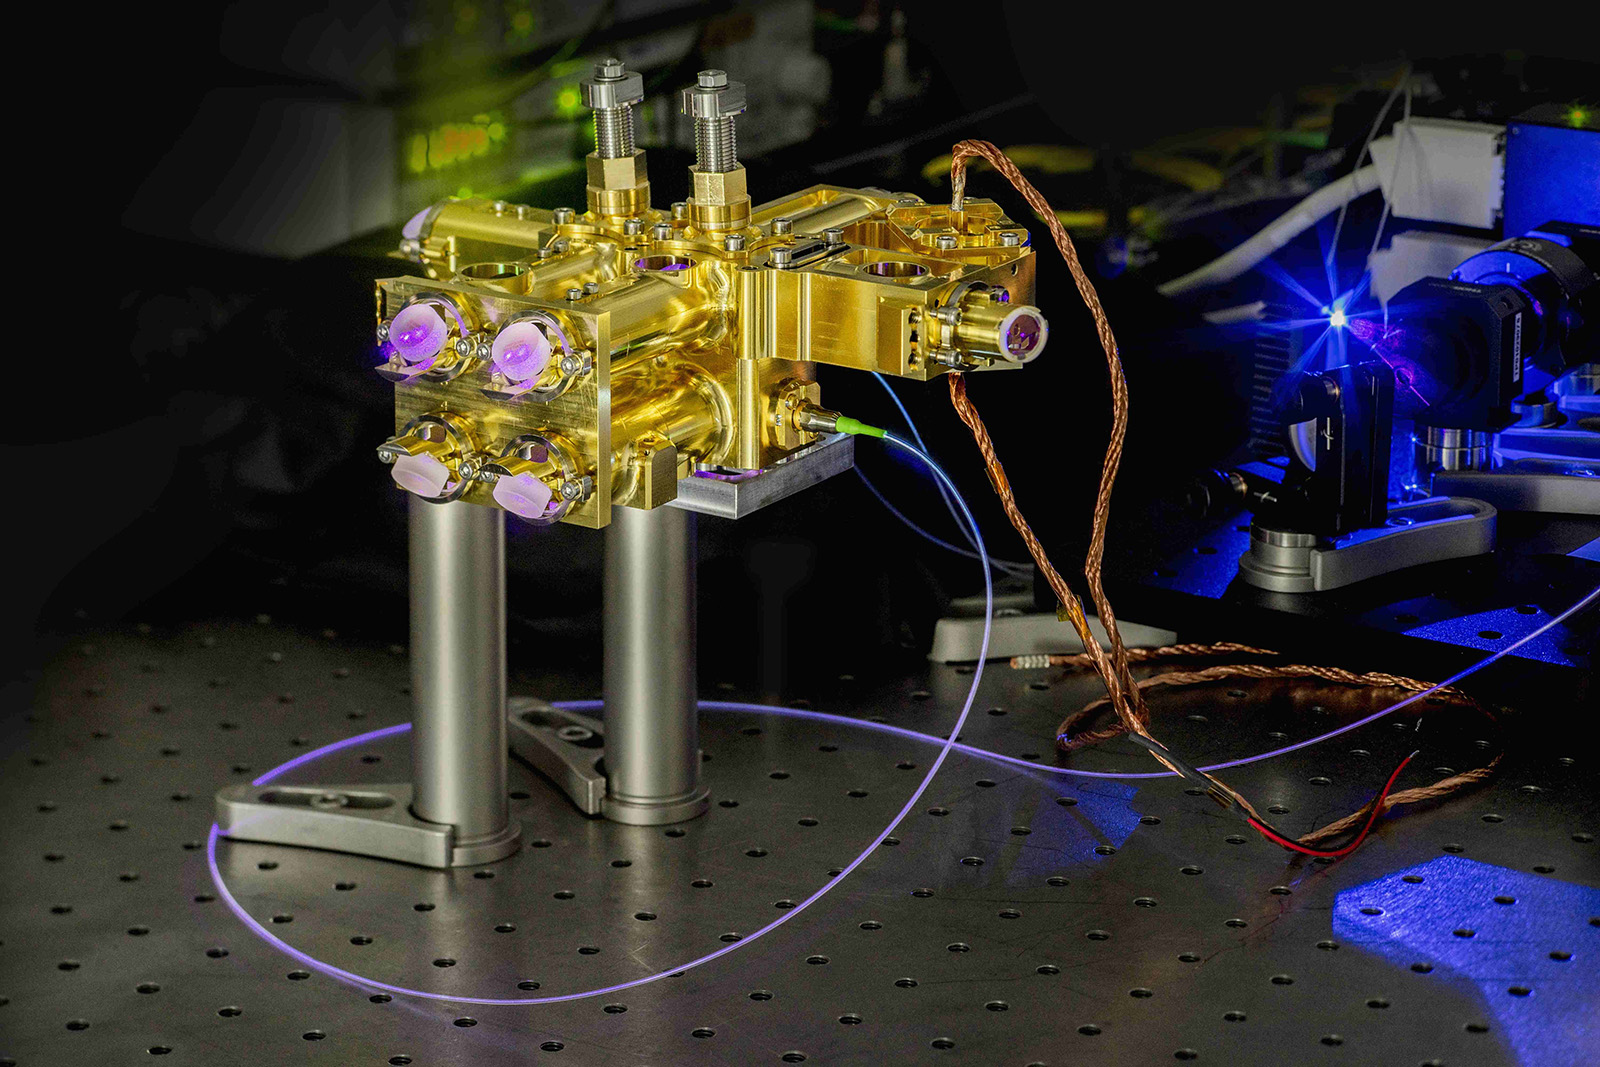 Fraunhofer IOF‘s quantum source. Designed to be fully operational even after extreme stress.